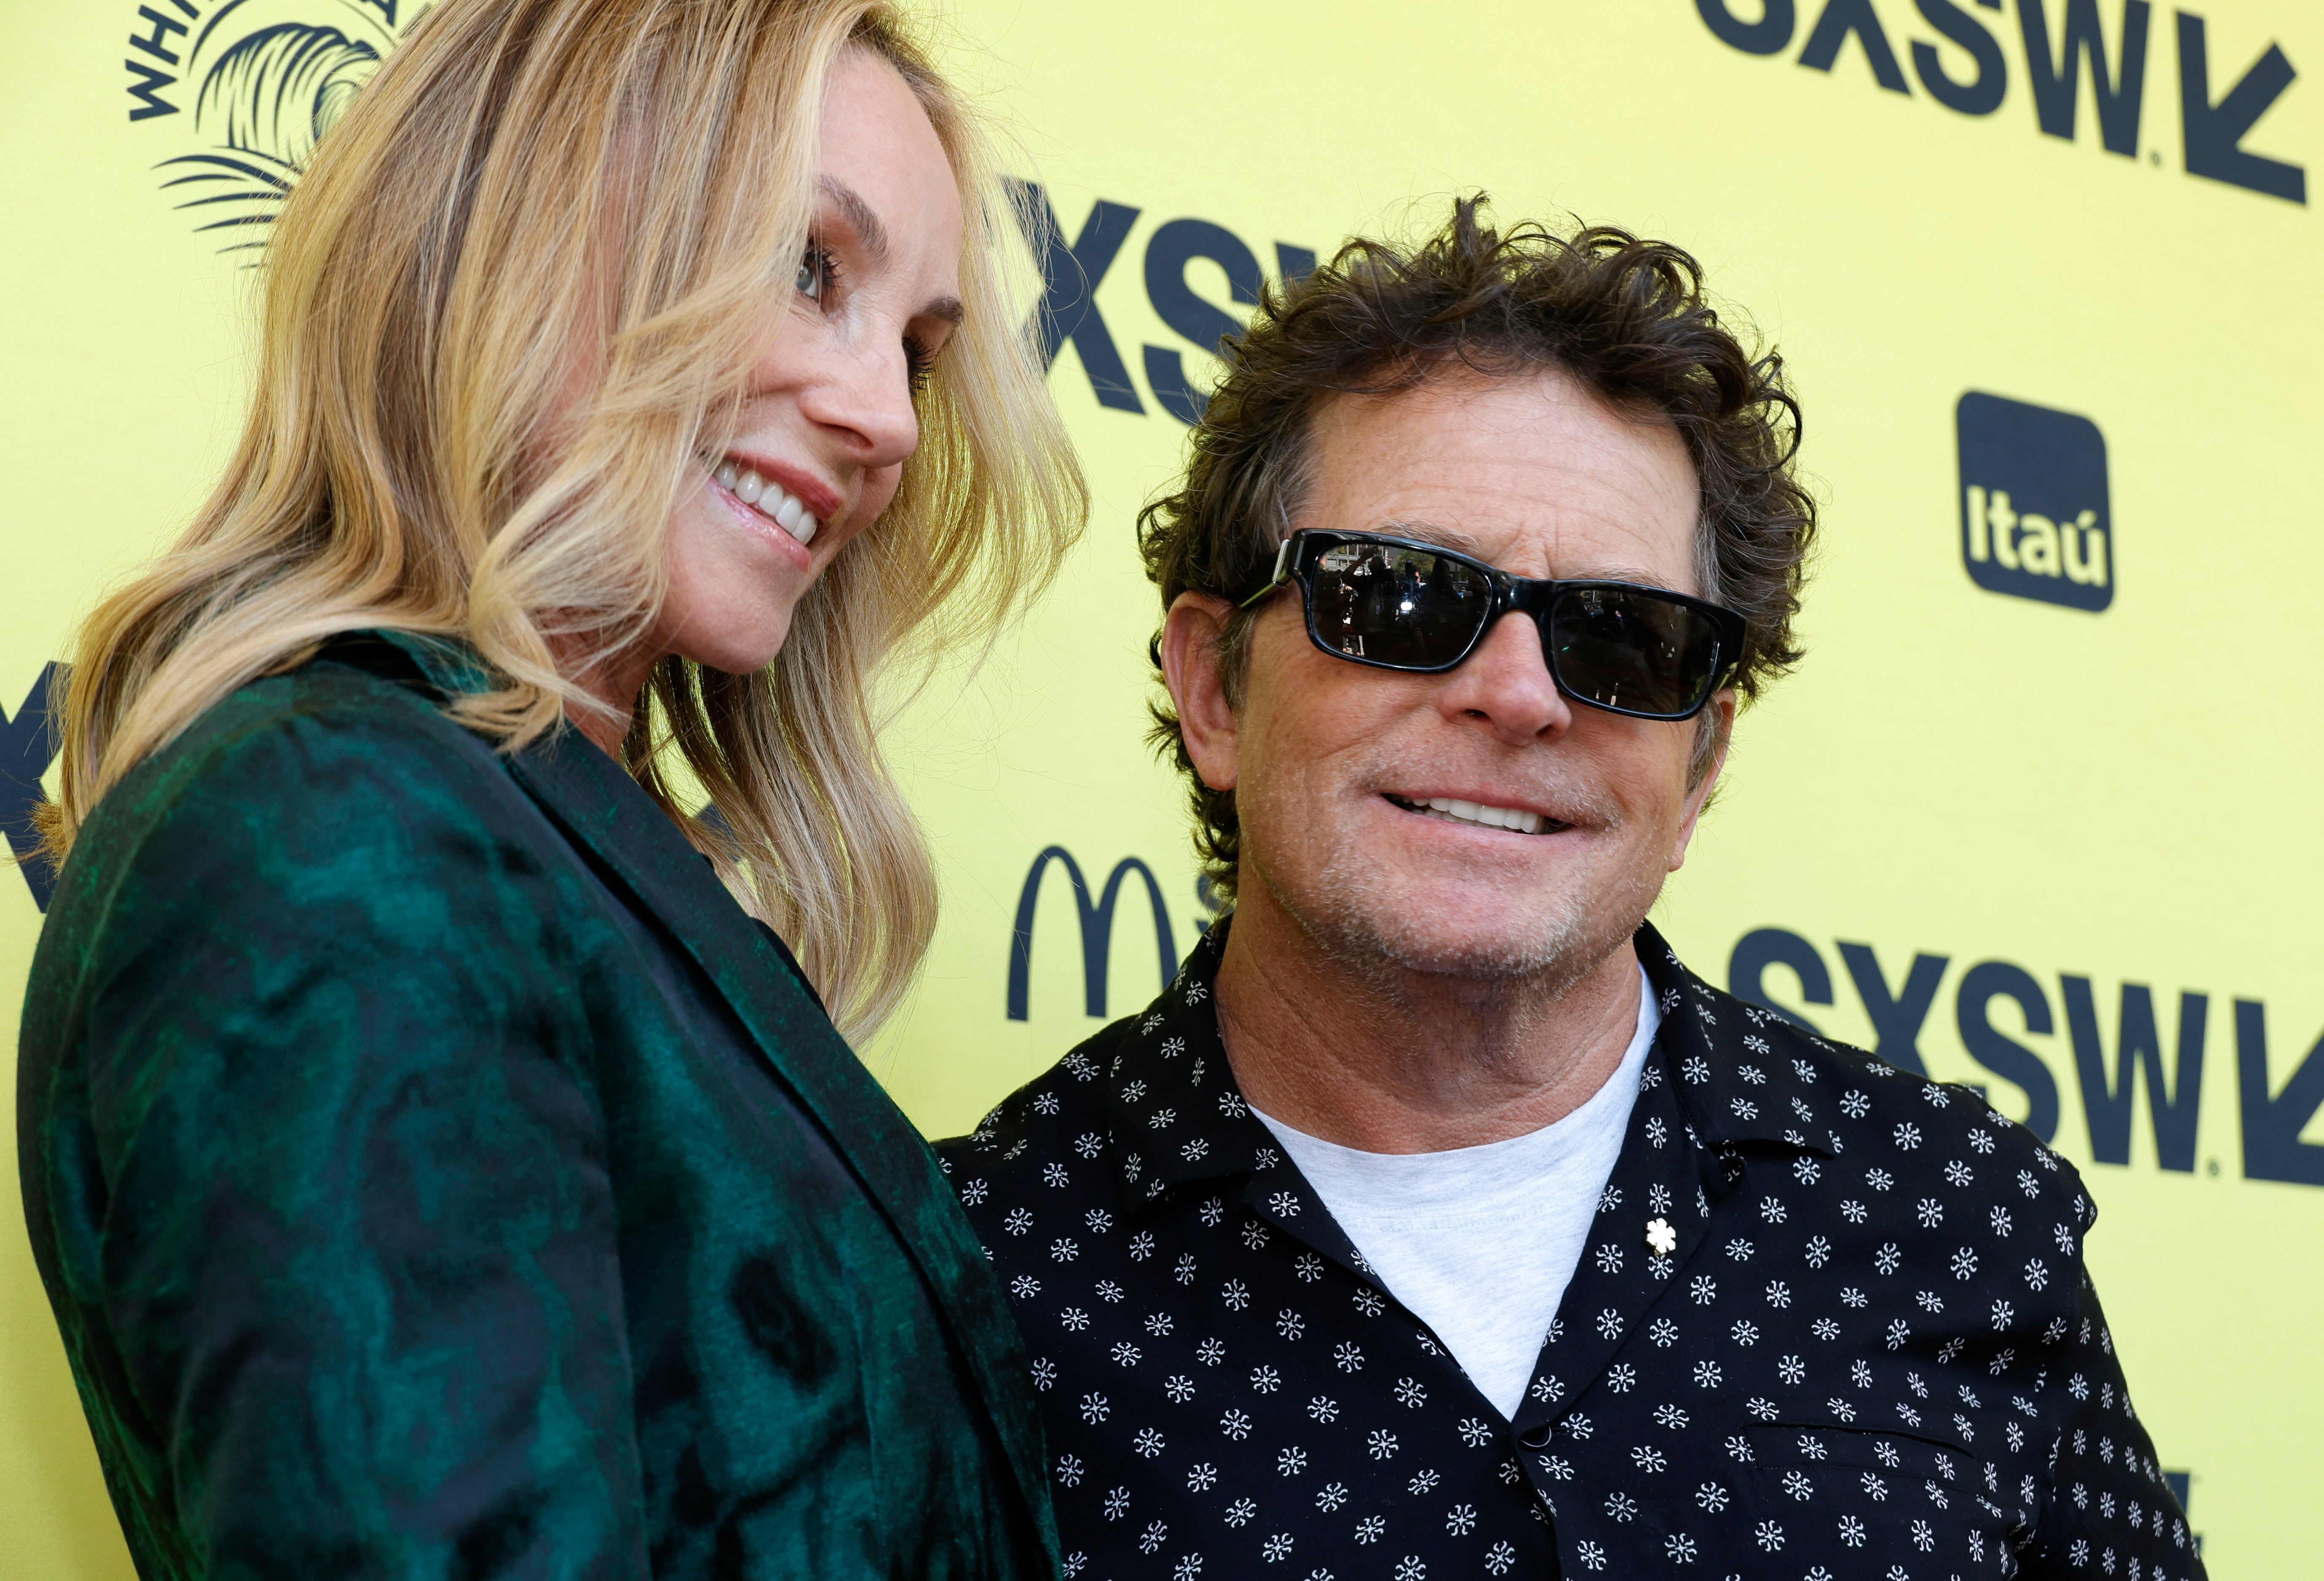 Michael J Fox says he first fell in love with wife Tracy Pollan when she angrily called him out over insult The Independent photo picture